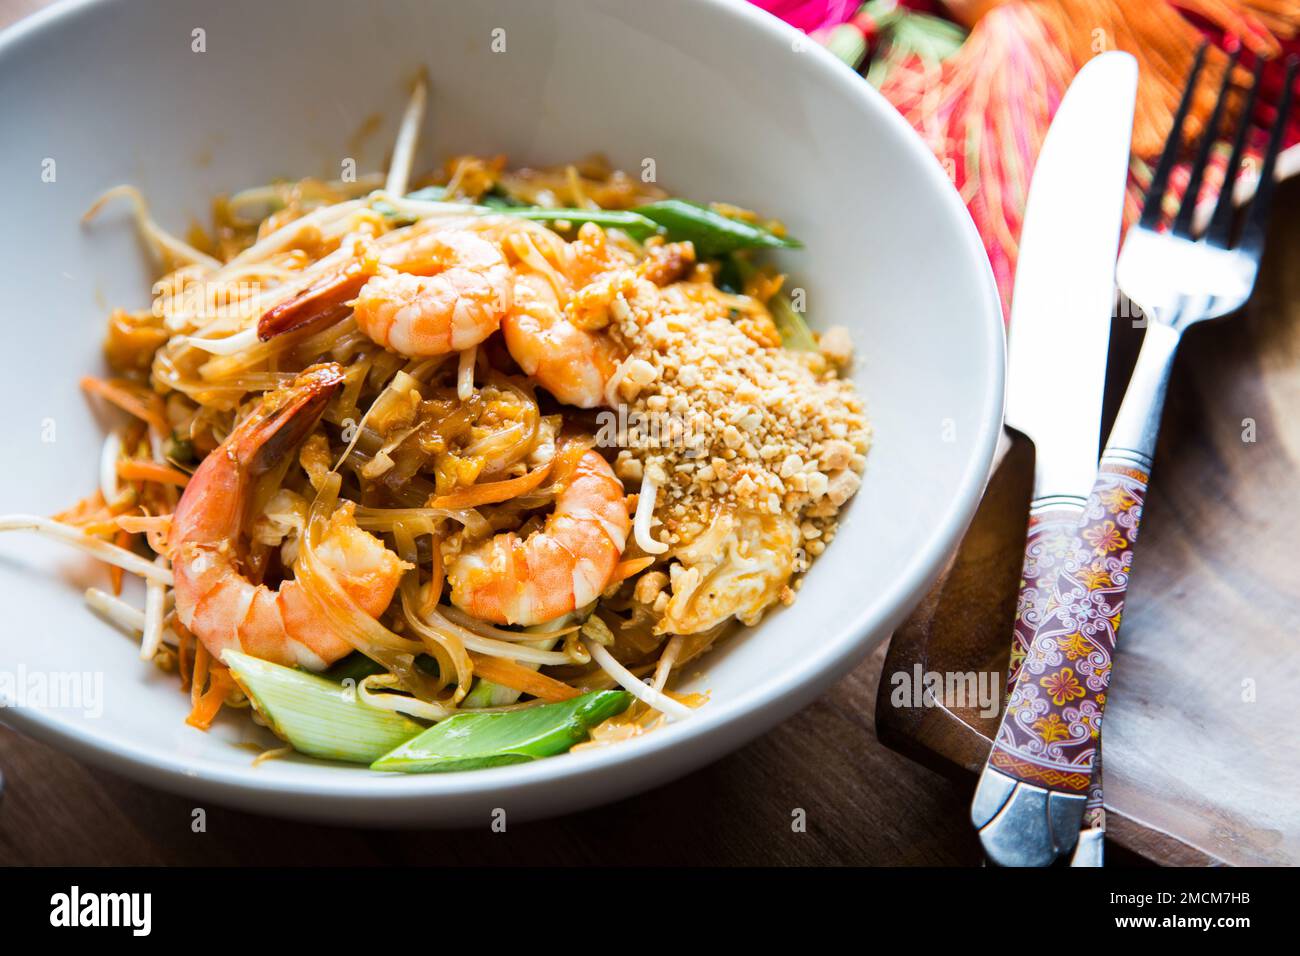 Pad thai, pad thai or pad thai, is a stir-fried rice noodle dish often served as street food in Thailand as part of the country's cuisine. Stock Photo